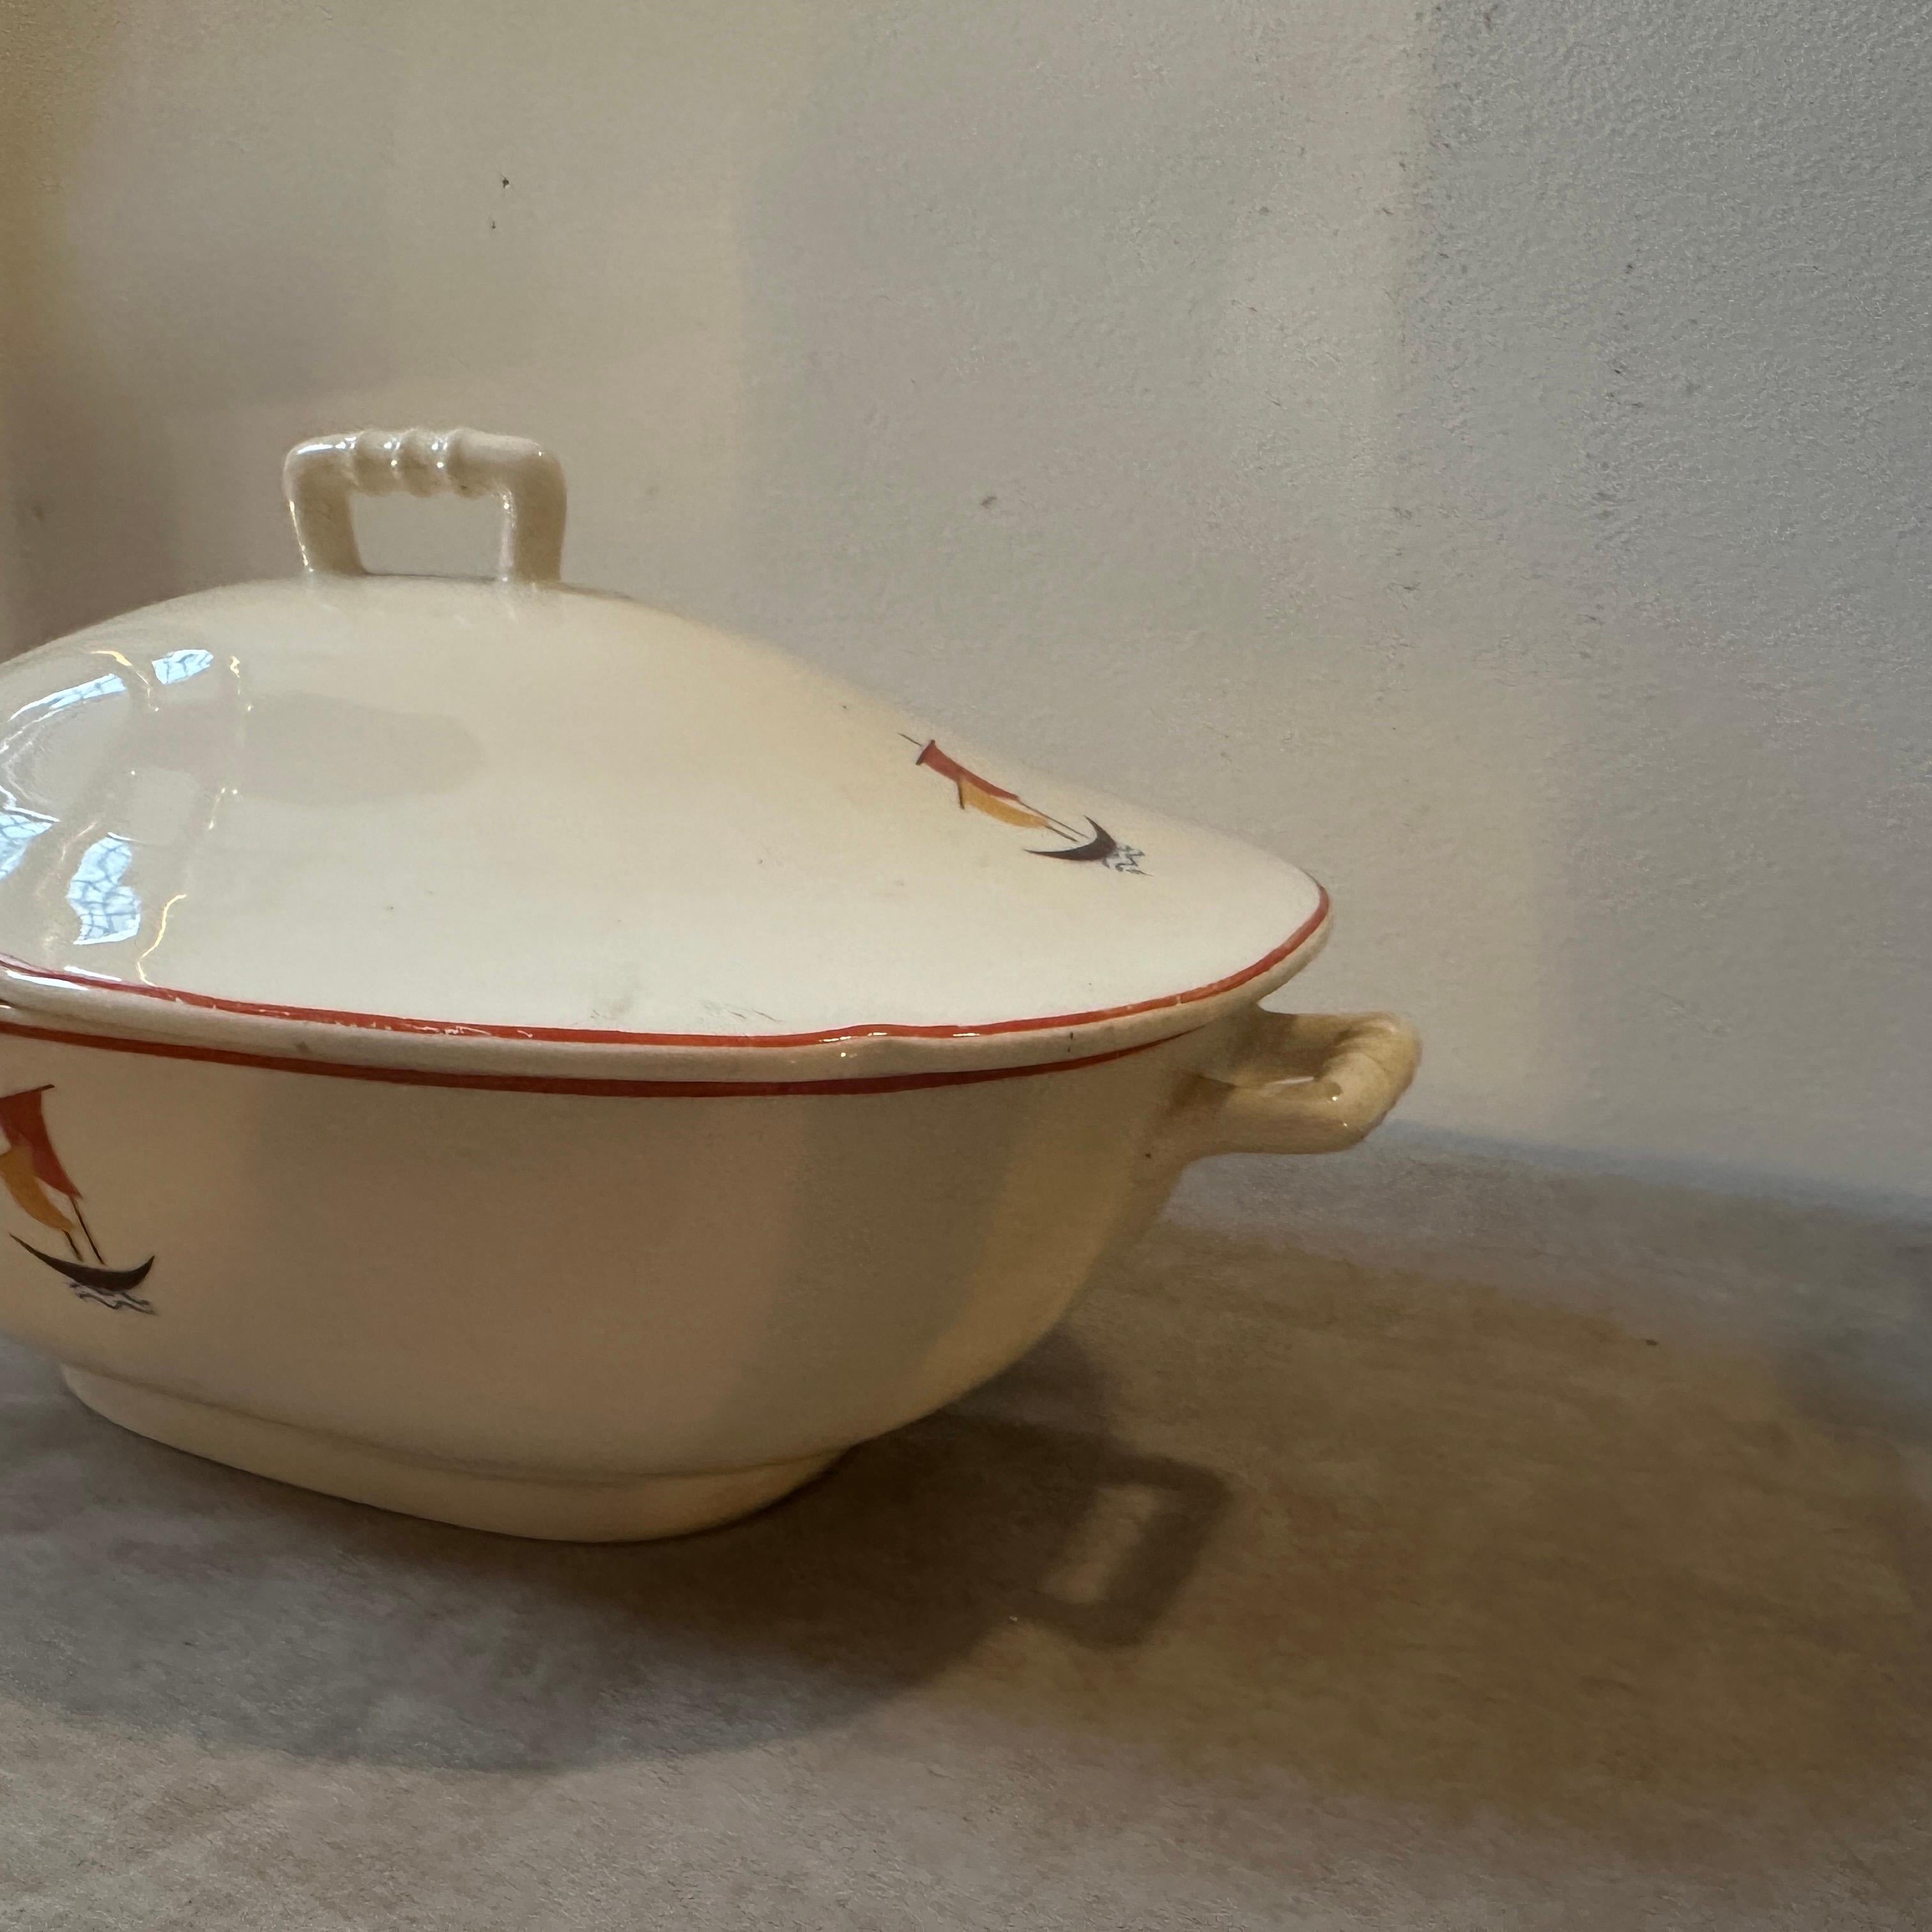 1935s Art Deco Ceramic Soup Tureen by Gio Ponti for S.C. Richard  For Sale 4